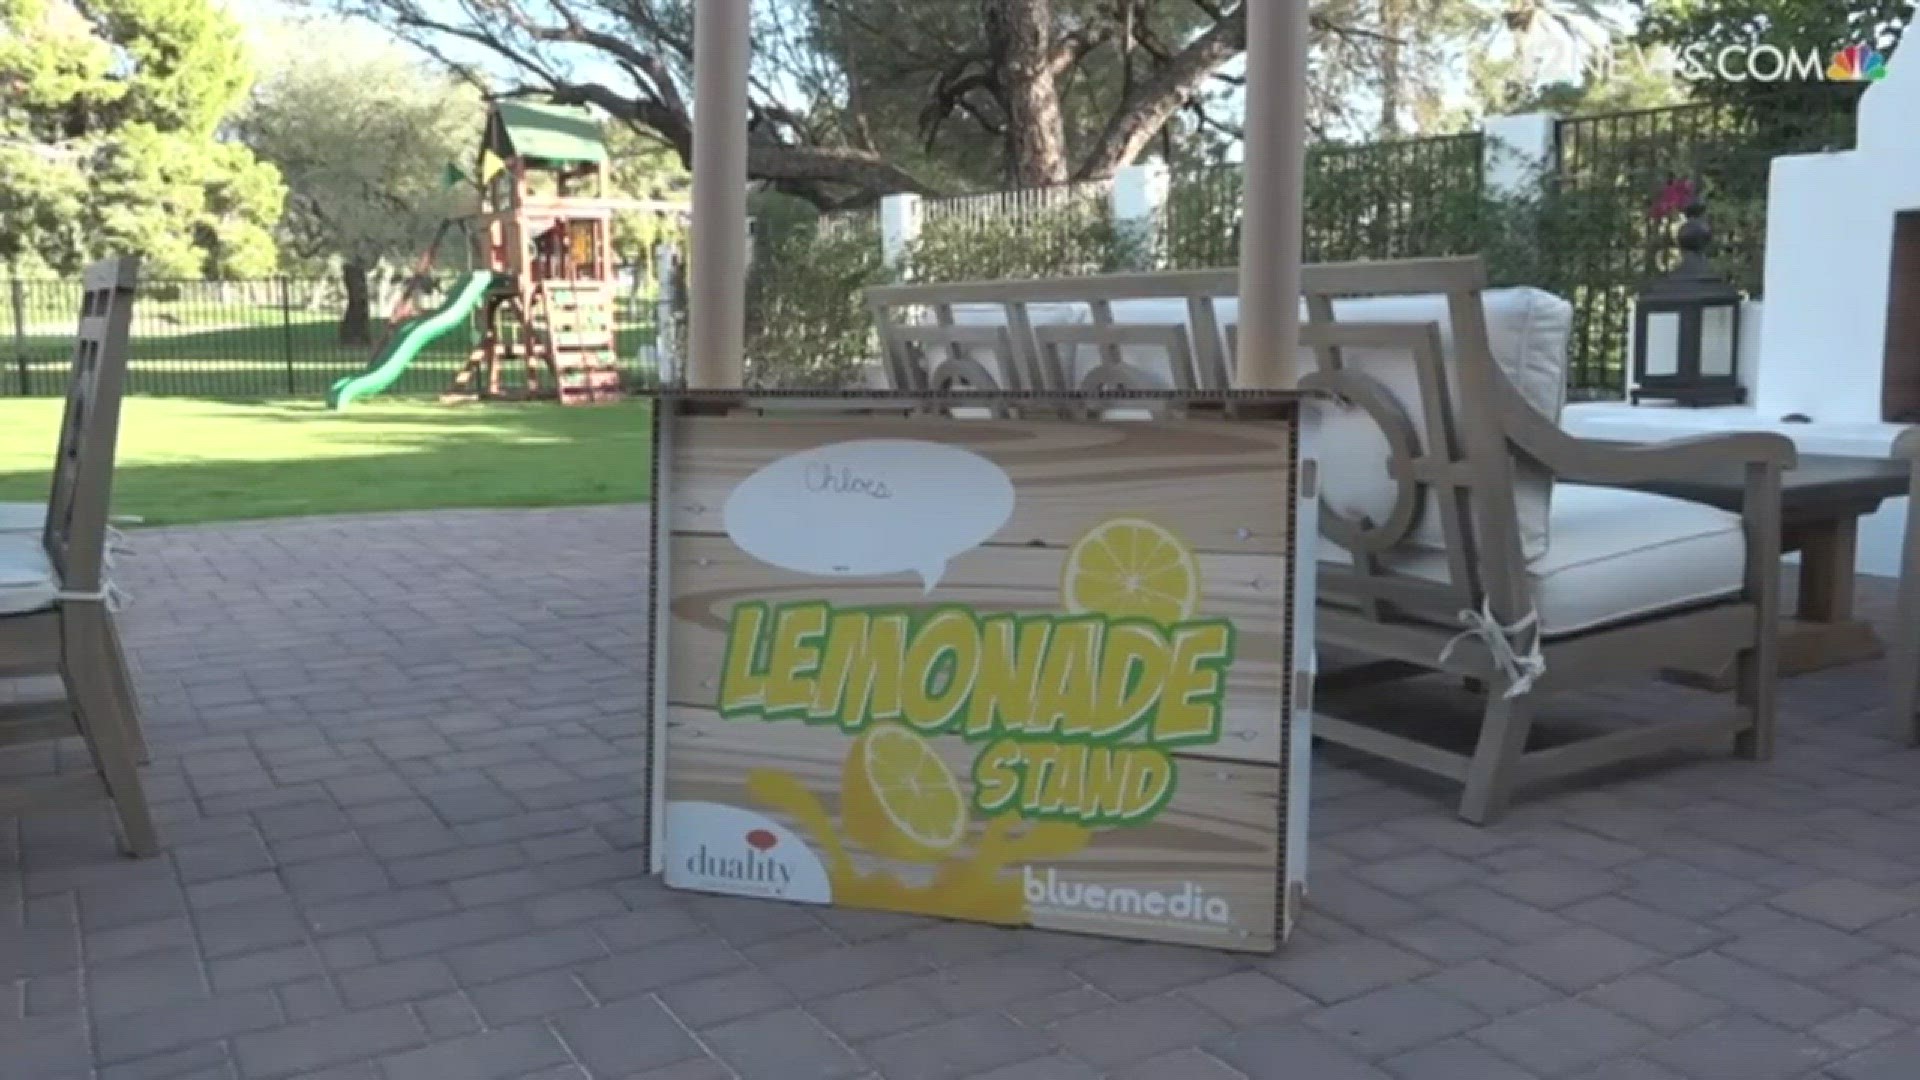 9-year-old raises $10,000 for ovarian cancer research by selling lemonade